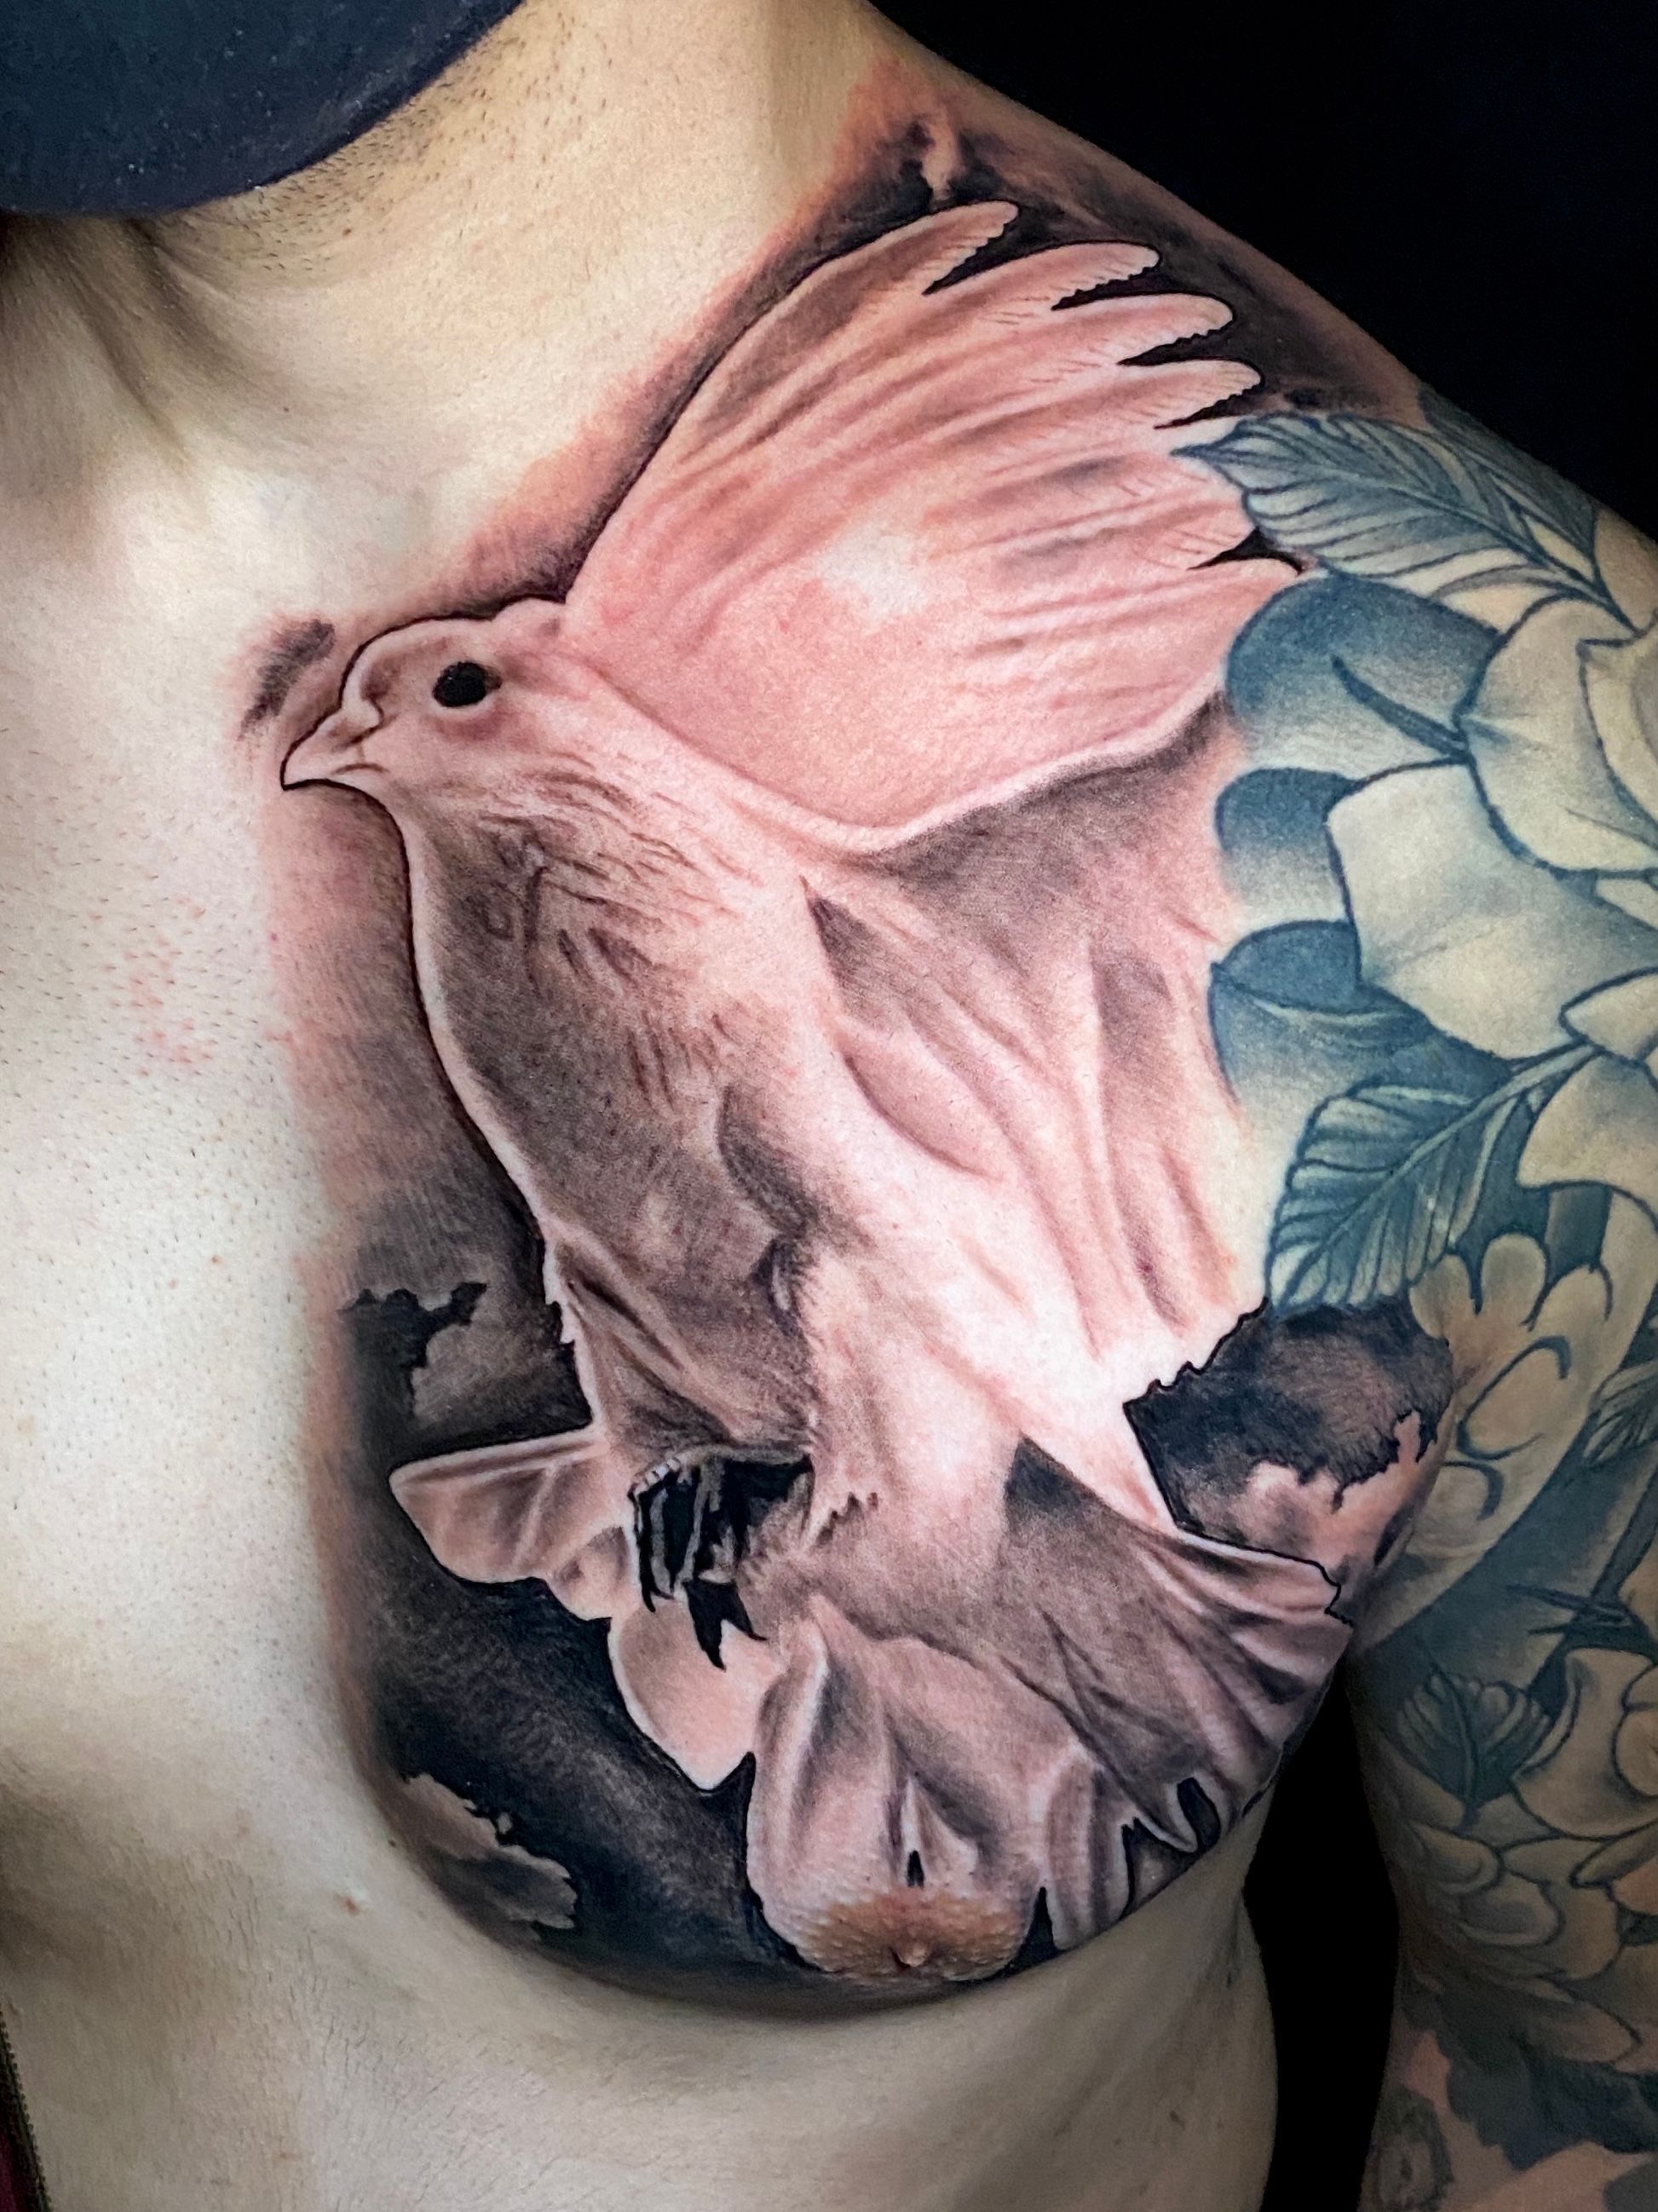 Tattoo uploaded by Uzi • Custom Dove Tattoo, Thank you Ivan for making the  trip from San Jose to collect this piece of art from me I truly appreciate  it! . . . #